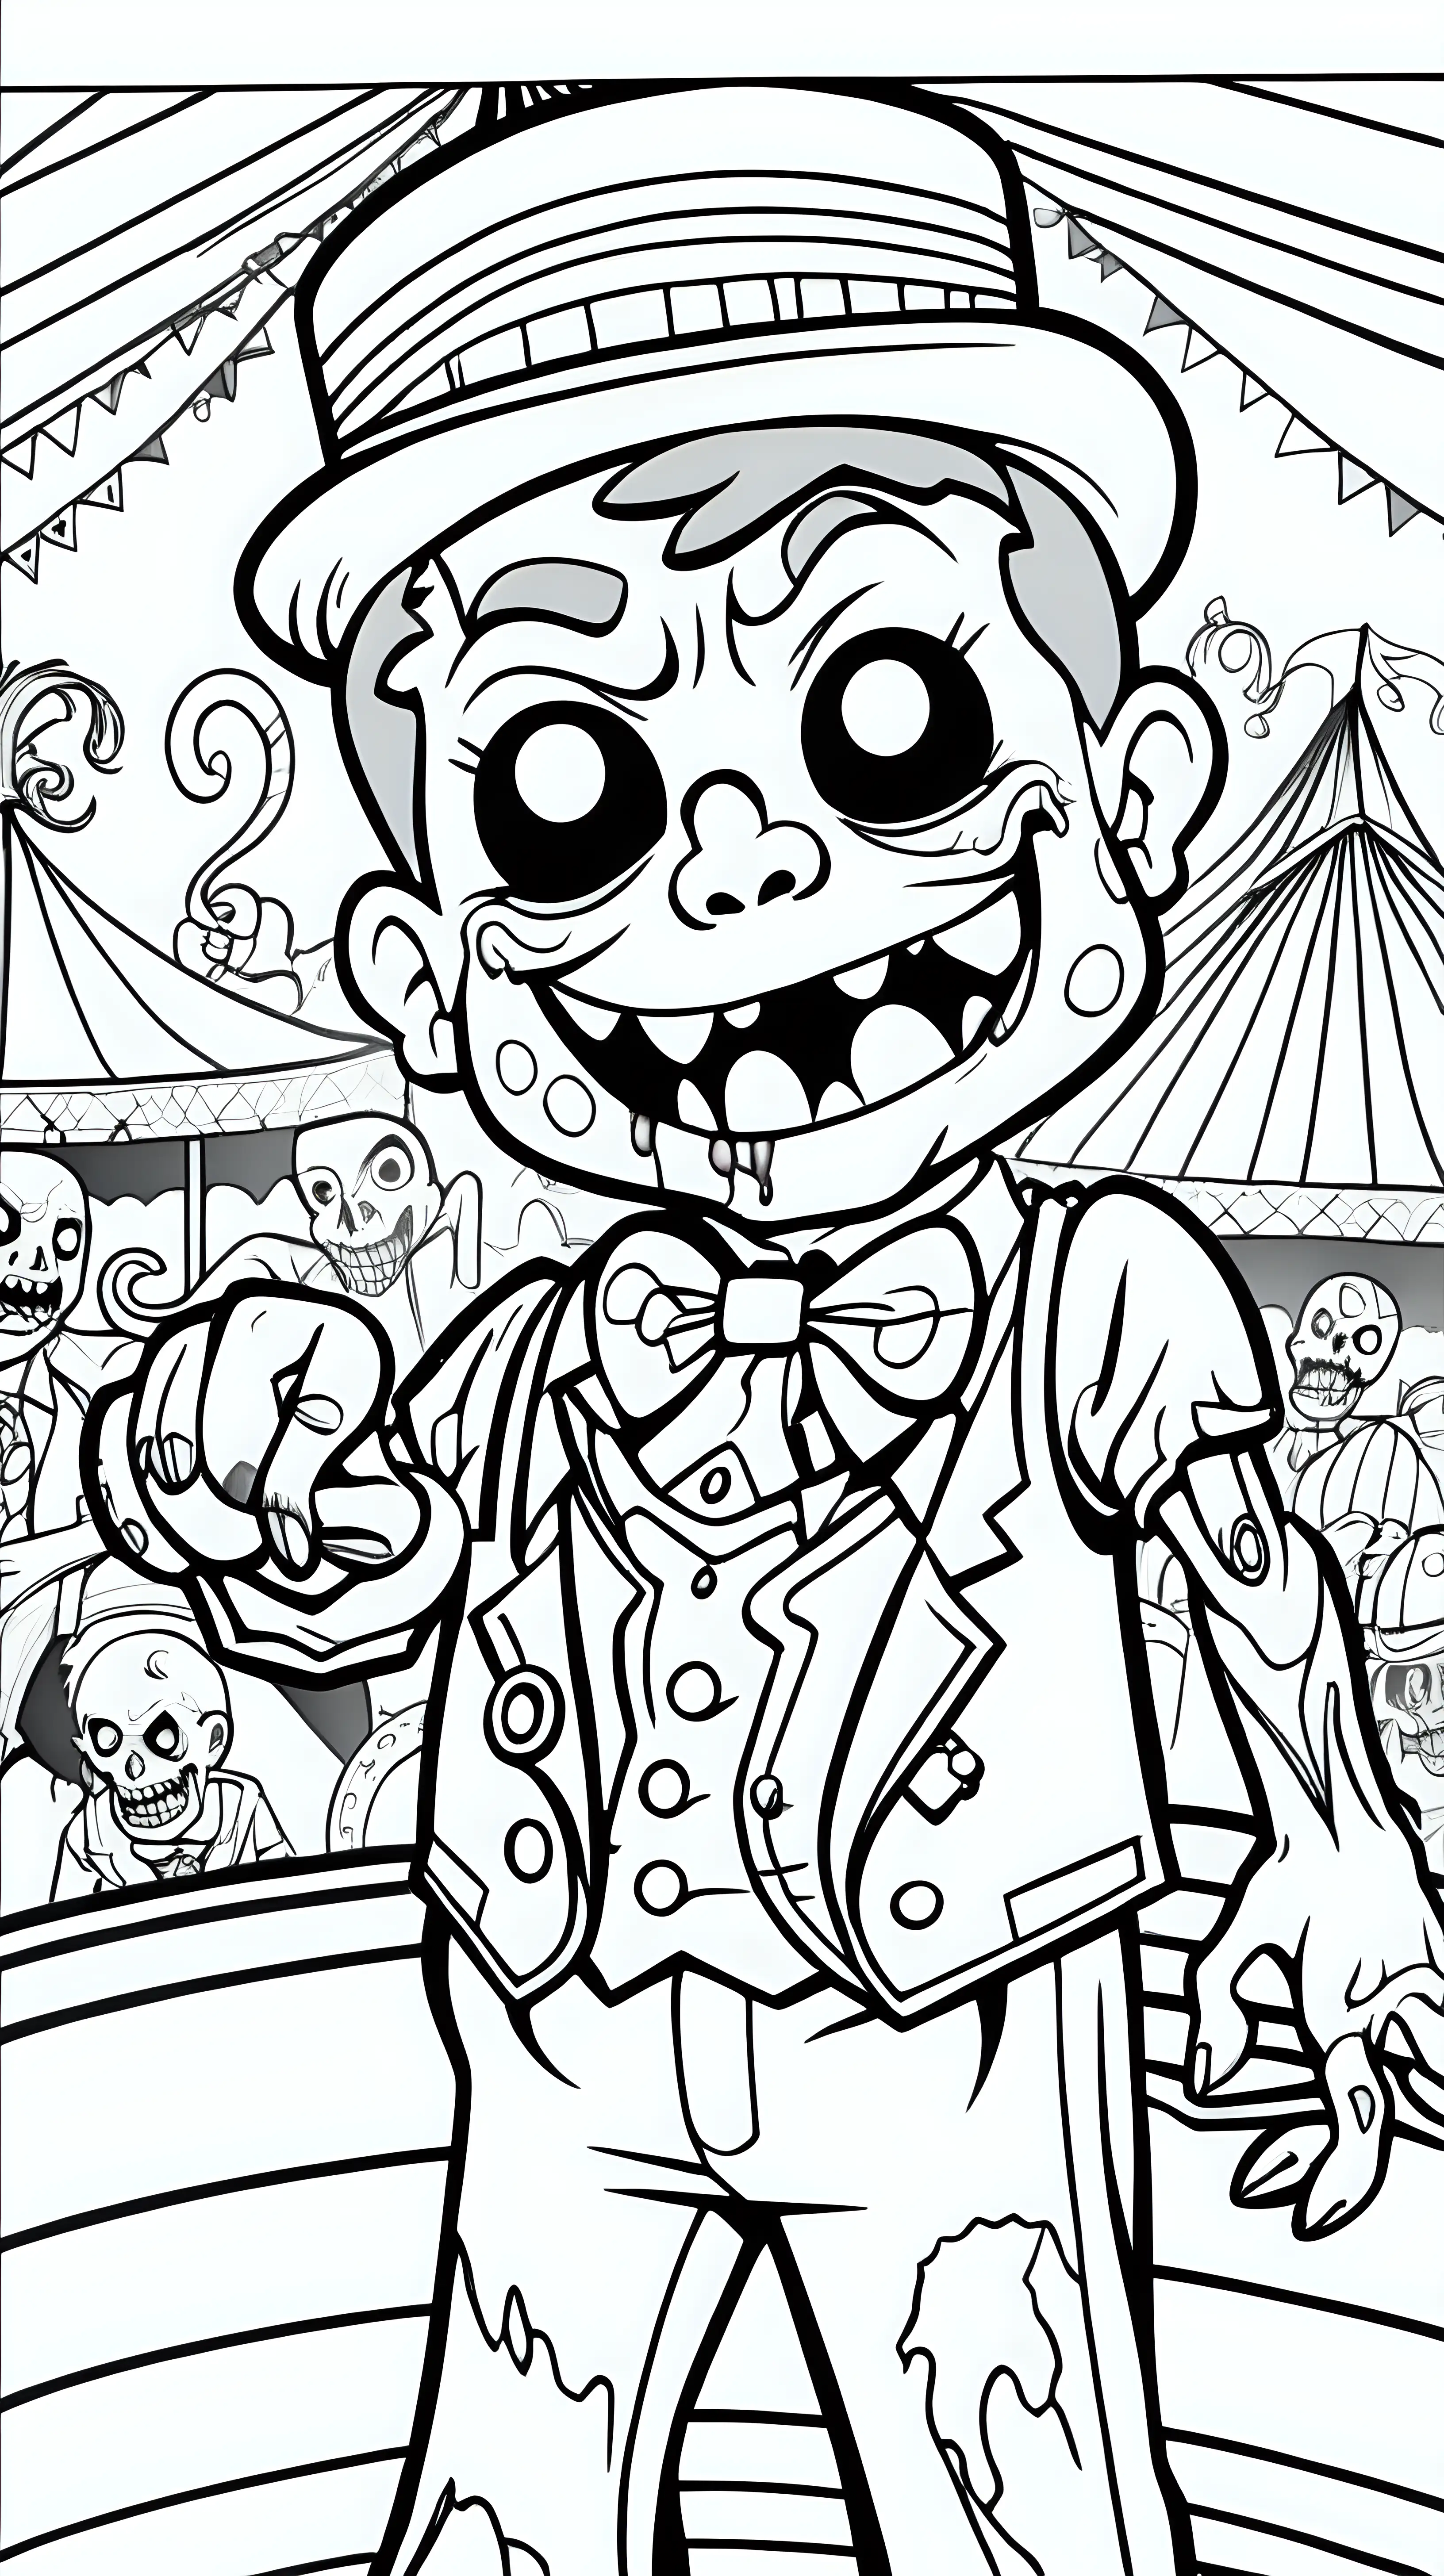 coloring book image, thick clean black line image of a cute friendly zombie at a circus , circus ring in background